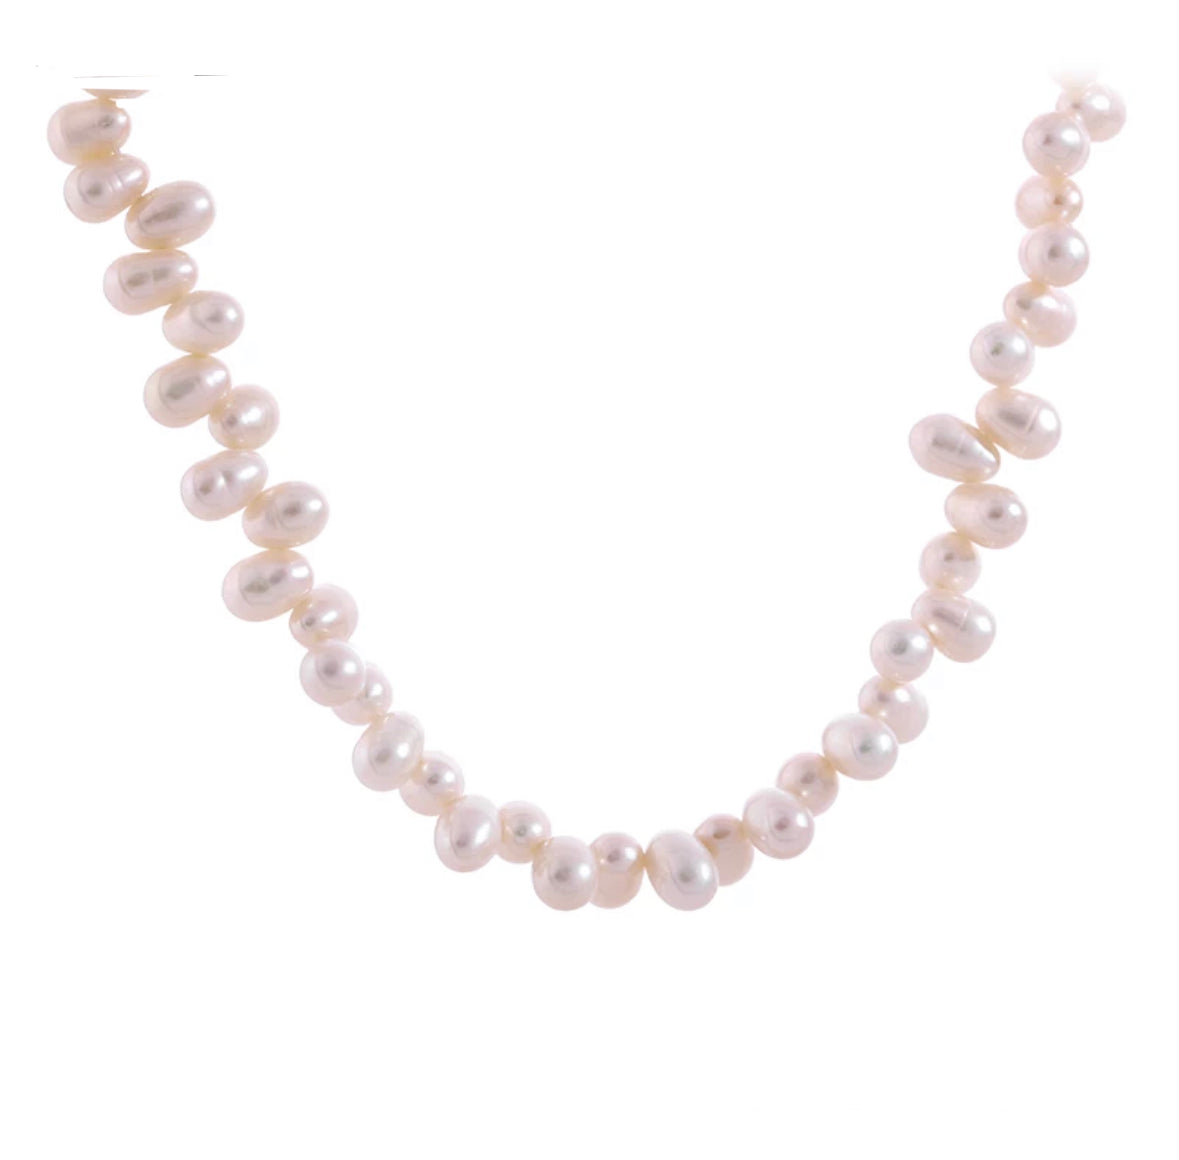 Shop the Dainty Minimalist Freshwater Pearl Beaded Choker Necklace - perfect for adding a touch of sophistication to any outfit. Secure lobster clasp for comfortable all-day wear. Order now for free shipping!